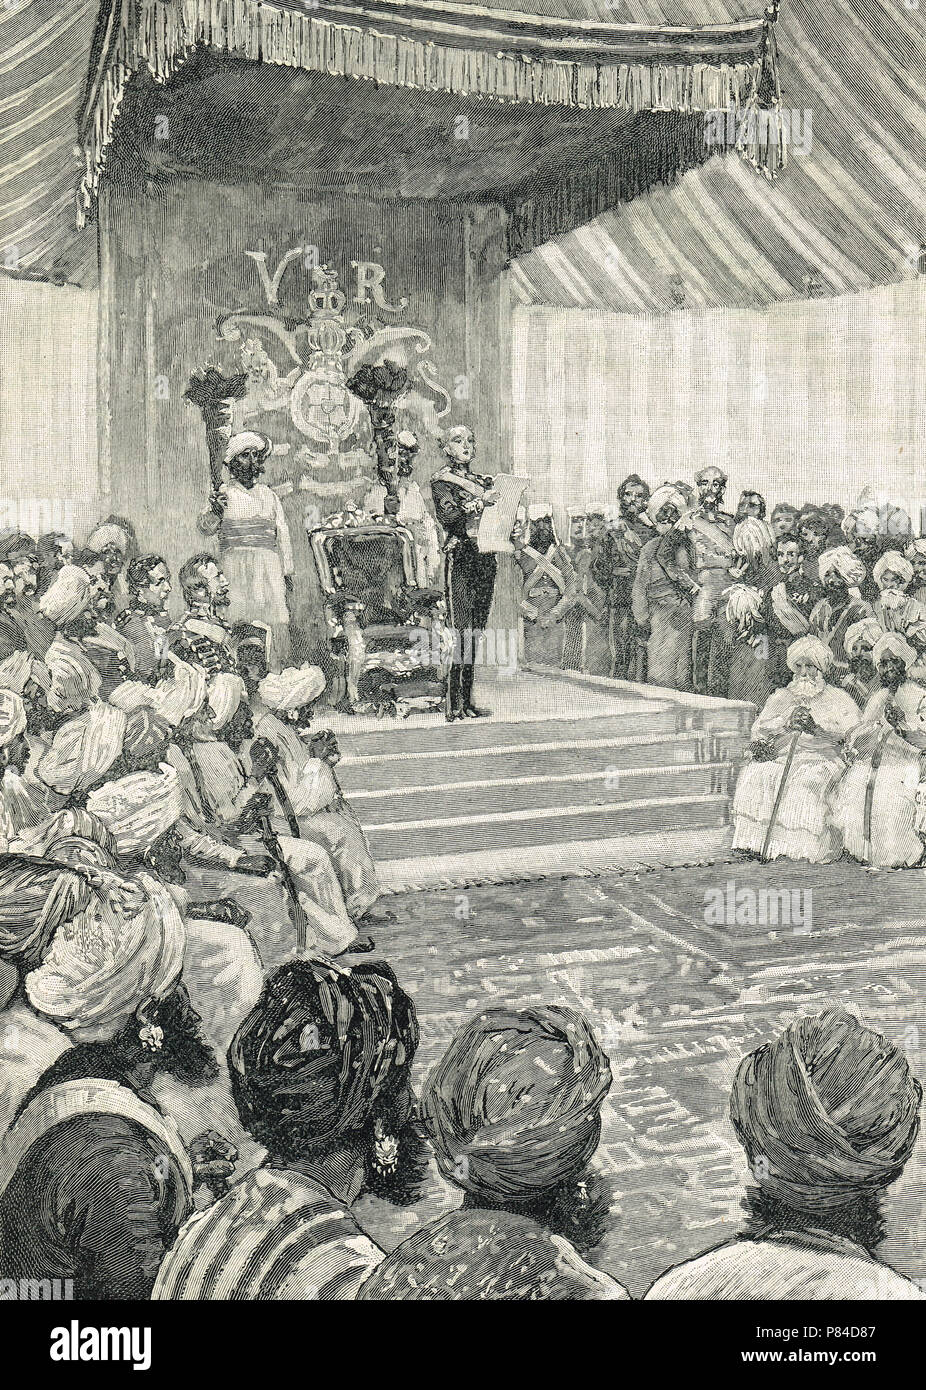 The Proclamation of Queen Victoria as sovereign of India by Lord Canning, at Allahabad, Uttar Pradesh, on 1 November 1858, under the Government of India Act 1858, following The Indian Rebellion of 1857 Stock Photo